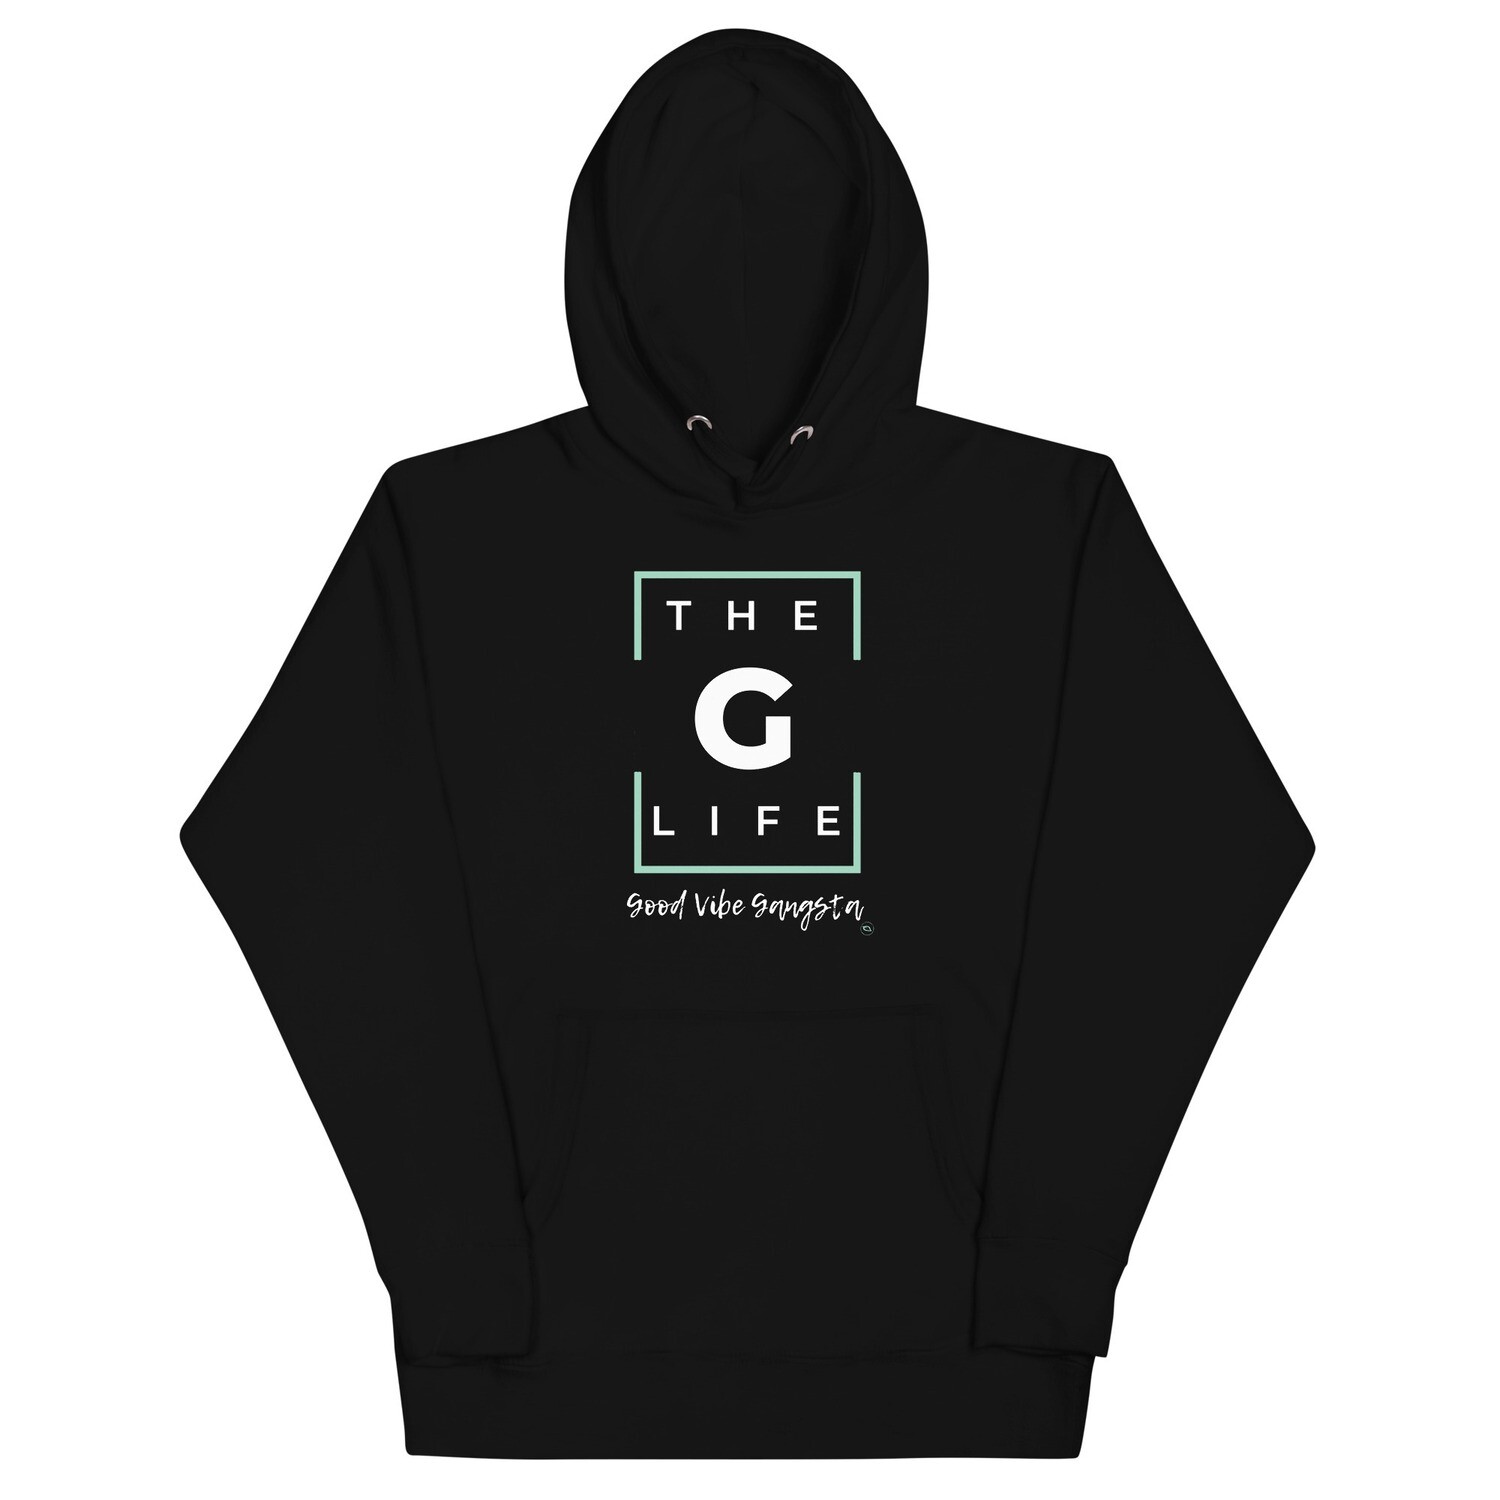 Good Vibe Gangsta | VOS | The G Life Classico Hoodie